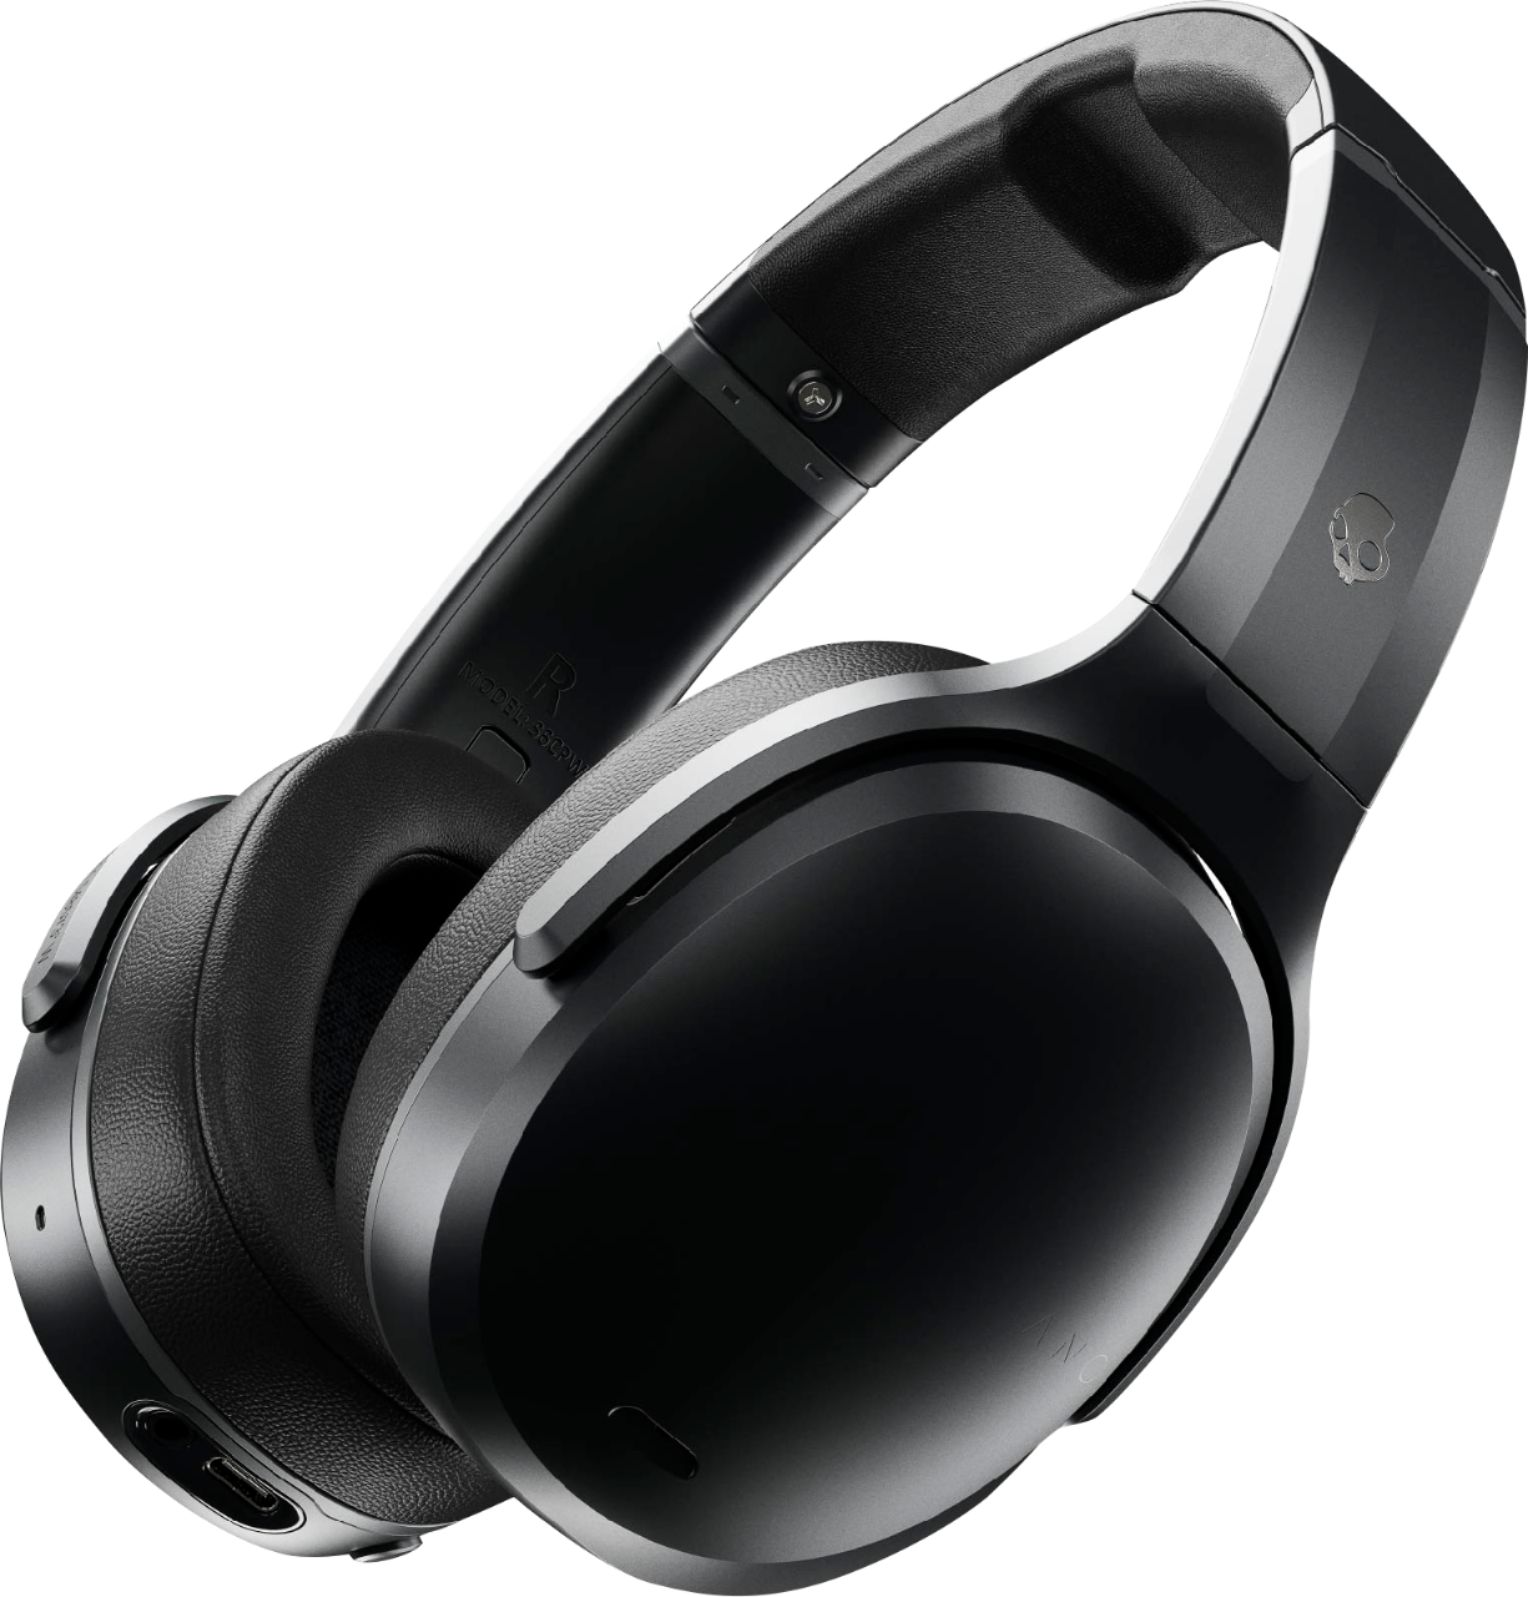 Skullcandy Crusher ANC Wireless Noise Cancelling Over-the-Ear Headphones  Black S6CPW-M448 - Best Buy